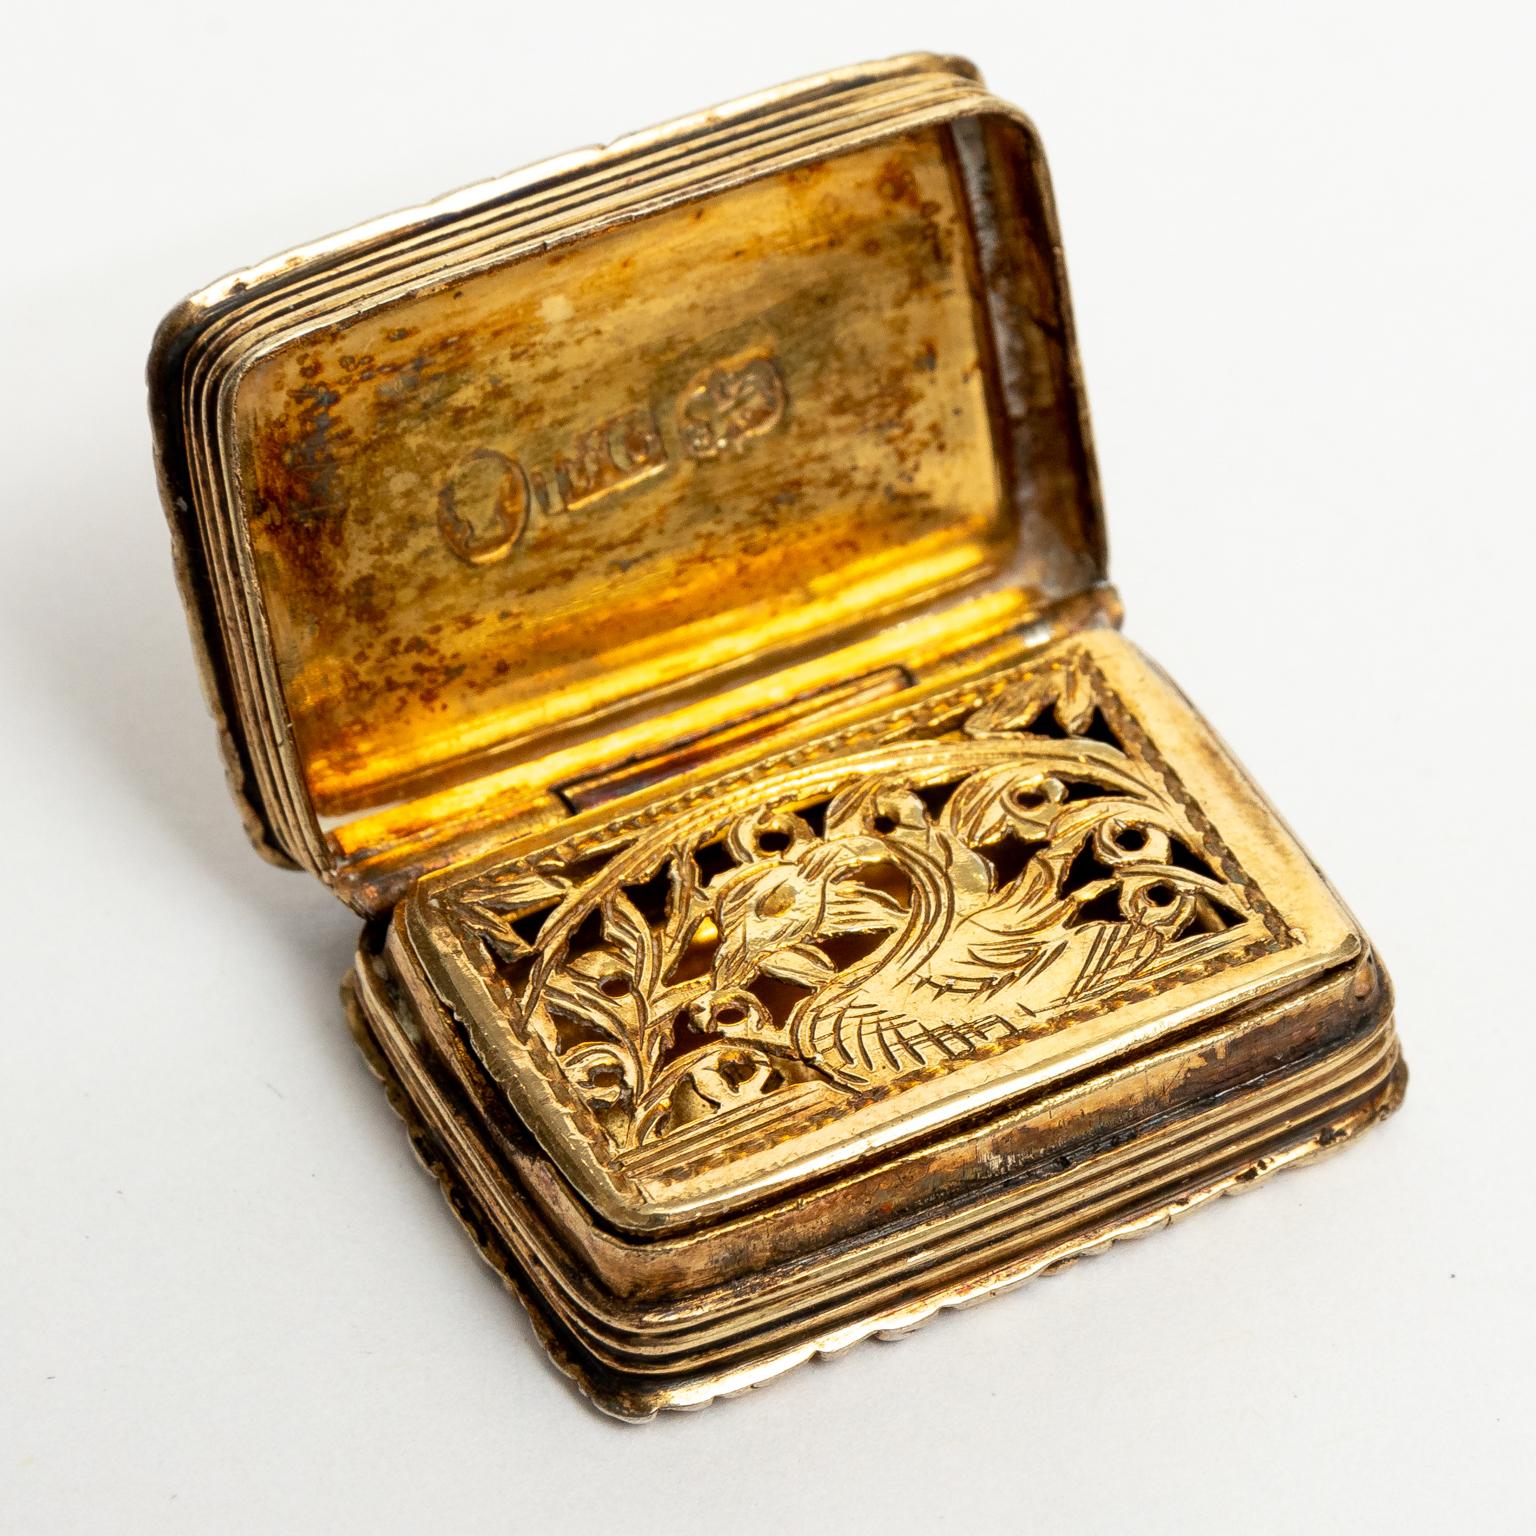 Circa early 19th century sterling silver vinaigrette box made in Birmingham, England. The interior is fitted with a small hinged screen decorated with a swan motif framed by scrolled foliage. This screen is used to securely enclose a small piece of